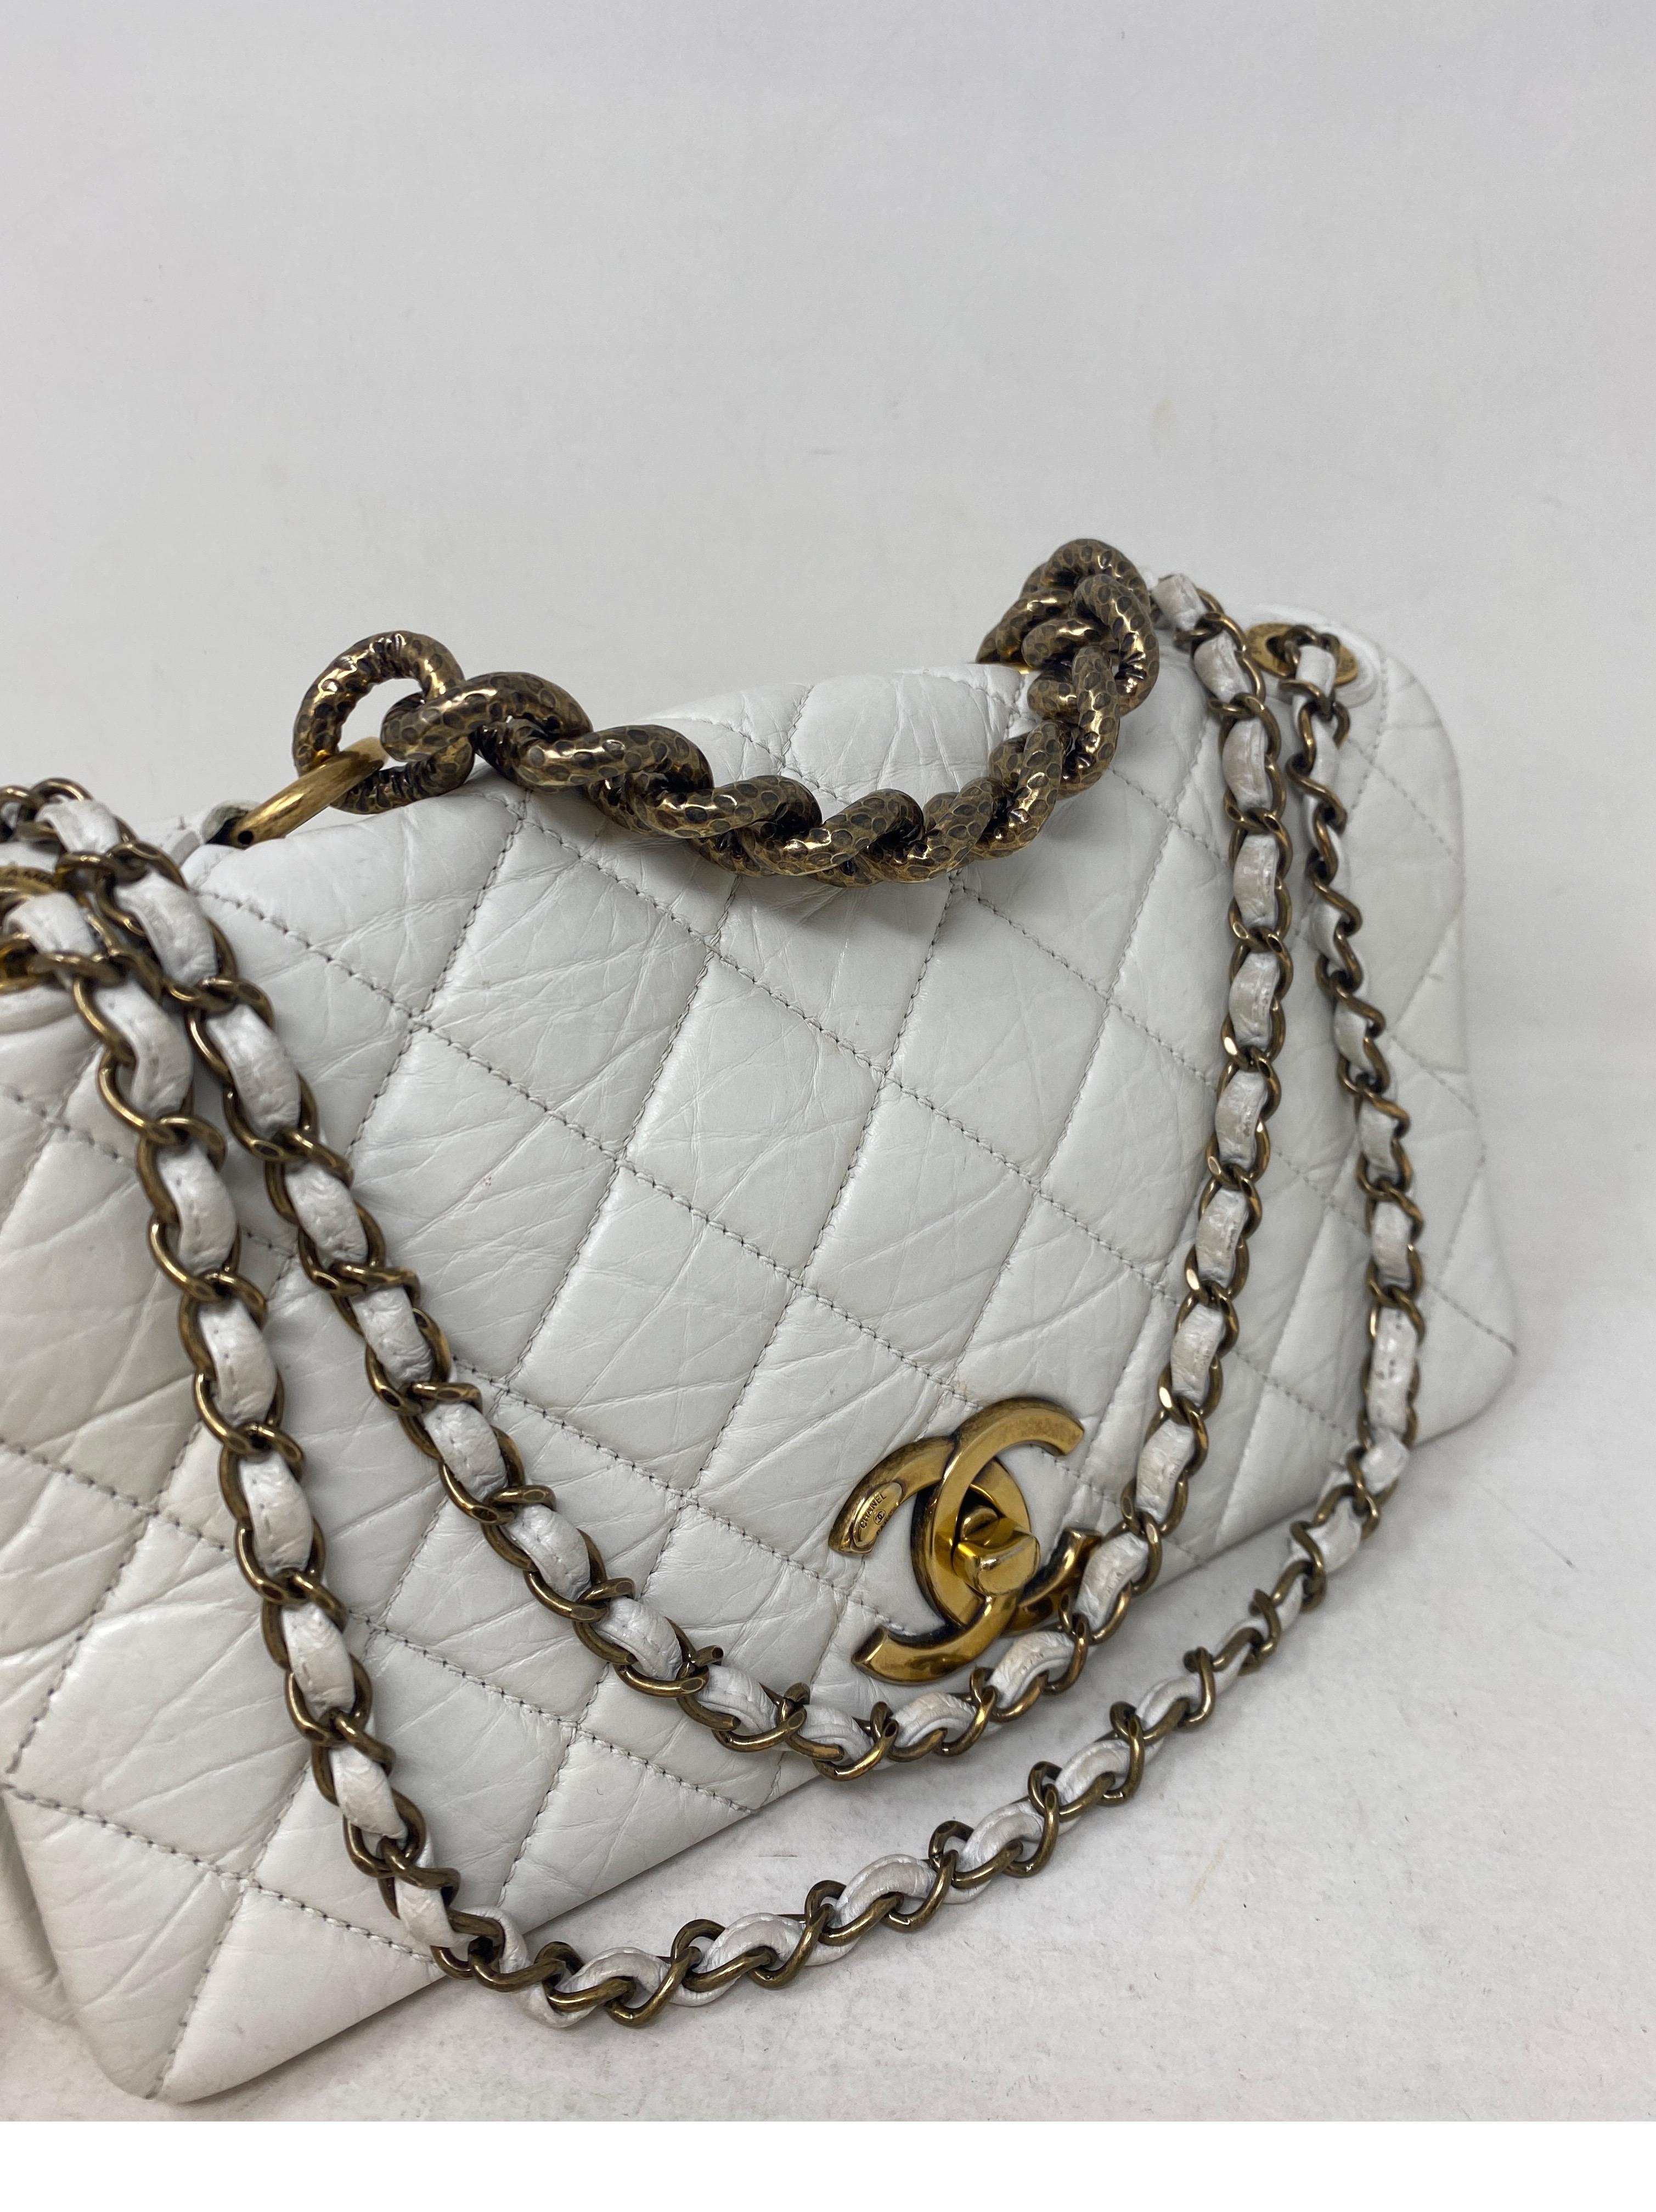 Chanel White Bag. Antique gold hardware. Winter white leather bag. Excellent condition. Can be worn as a shoulder bag or longer. Interior clean. Looks like new. Unique style bag from Chanel. Serial number is intact inside bag. Guaranteed authentic. 